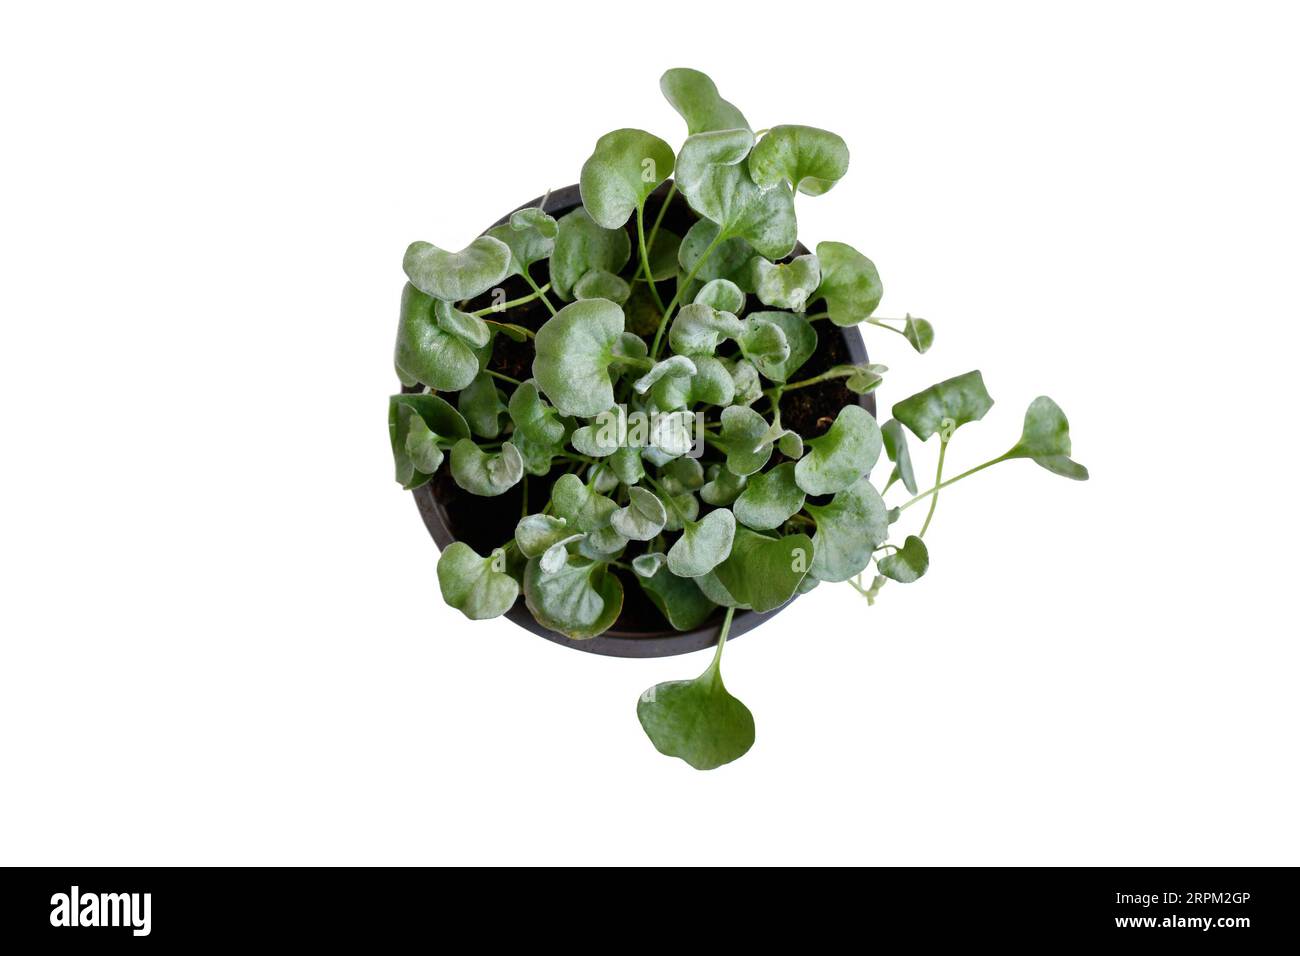 Top view of small 'Dichondra Argentea' plant in pot on white background Stock Photo